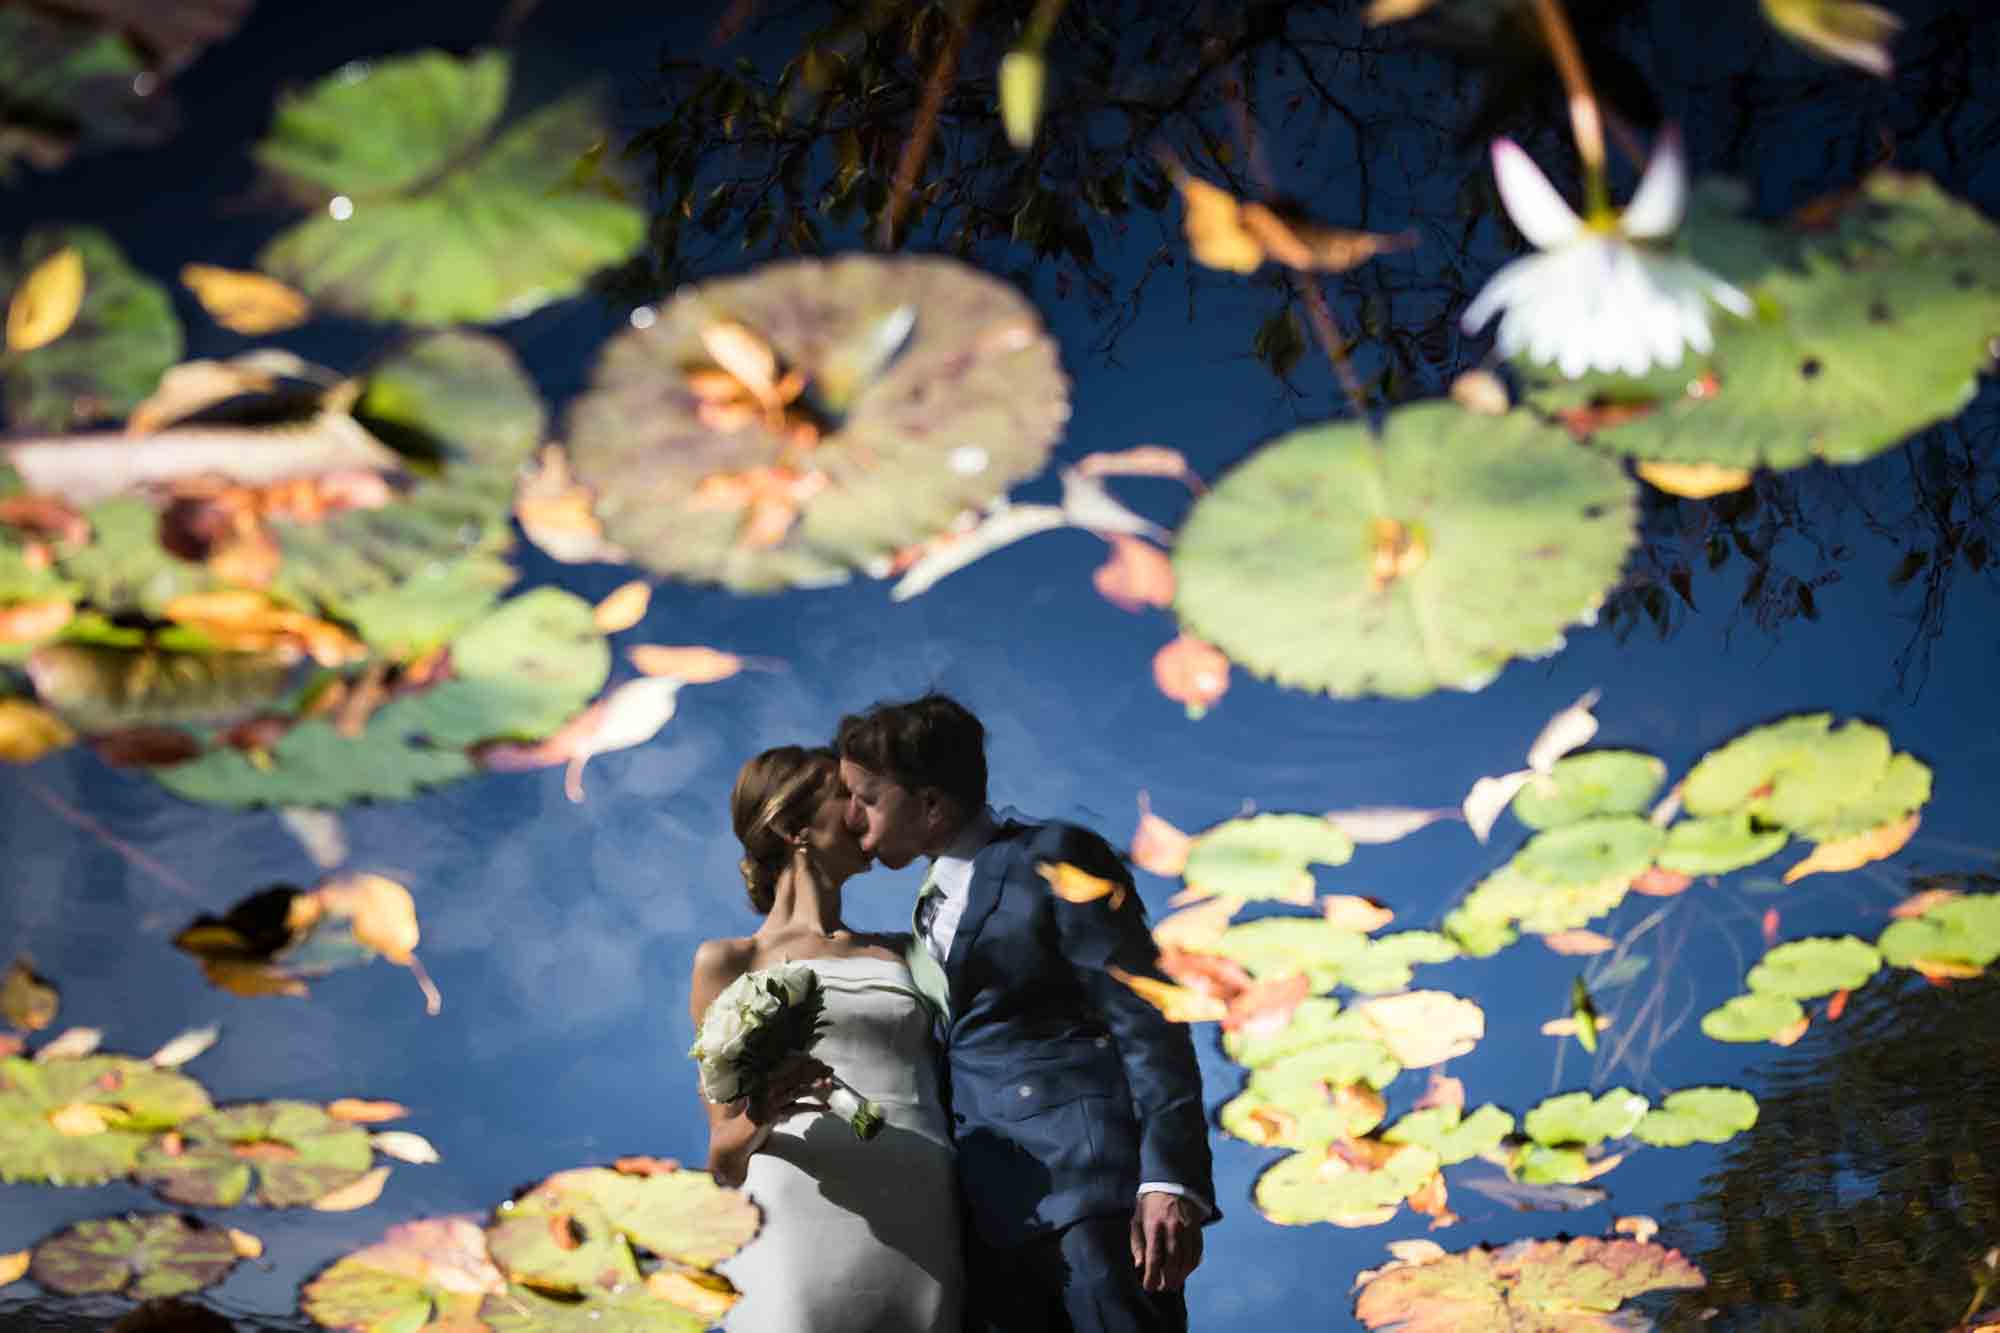 Conservatory Garden wedding photos of bride and groom kissing reflected in pond